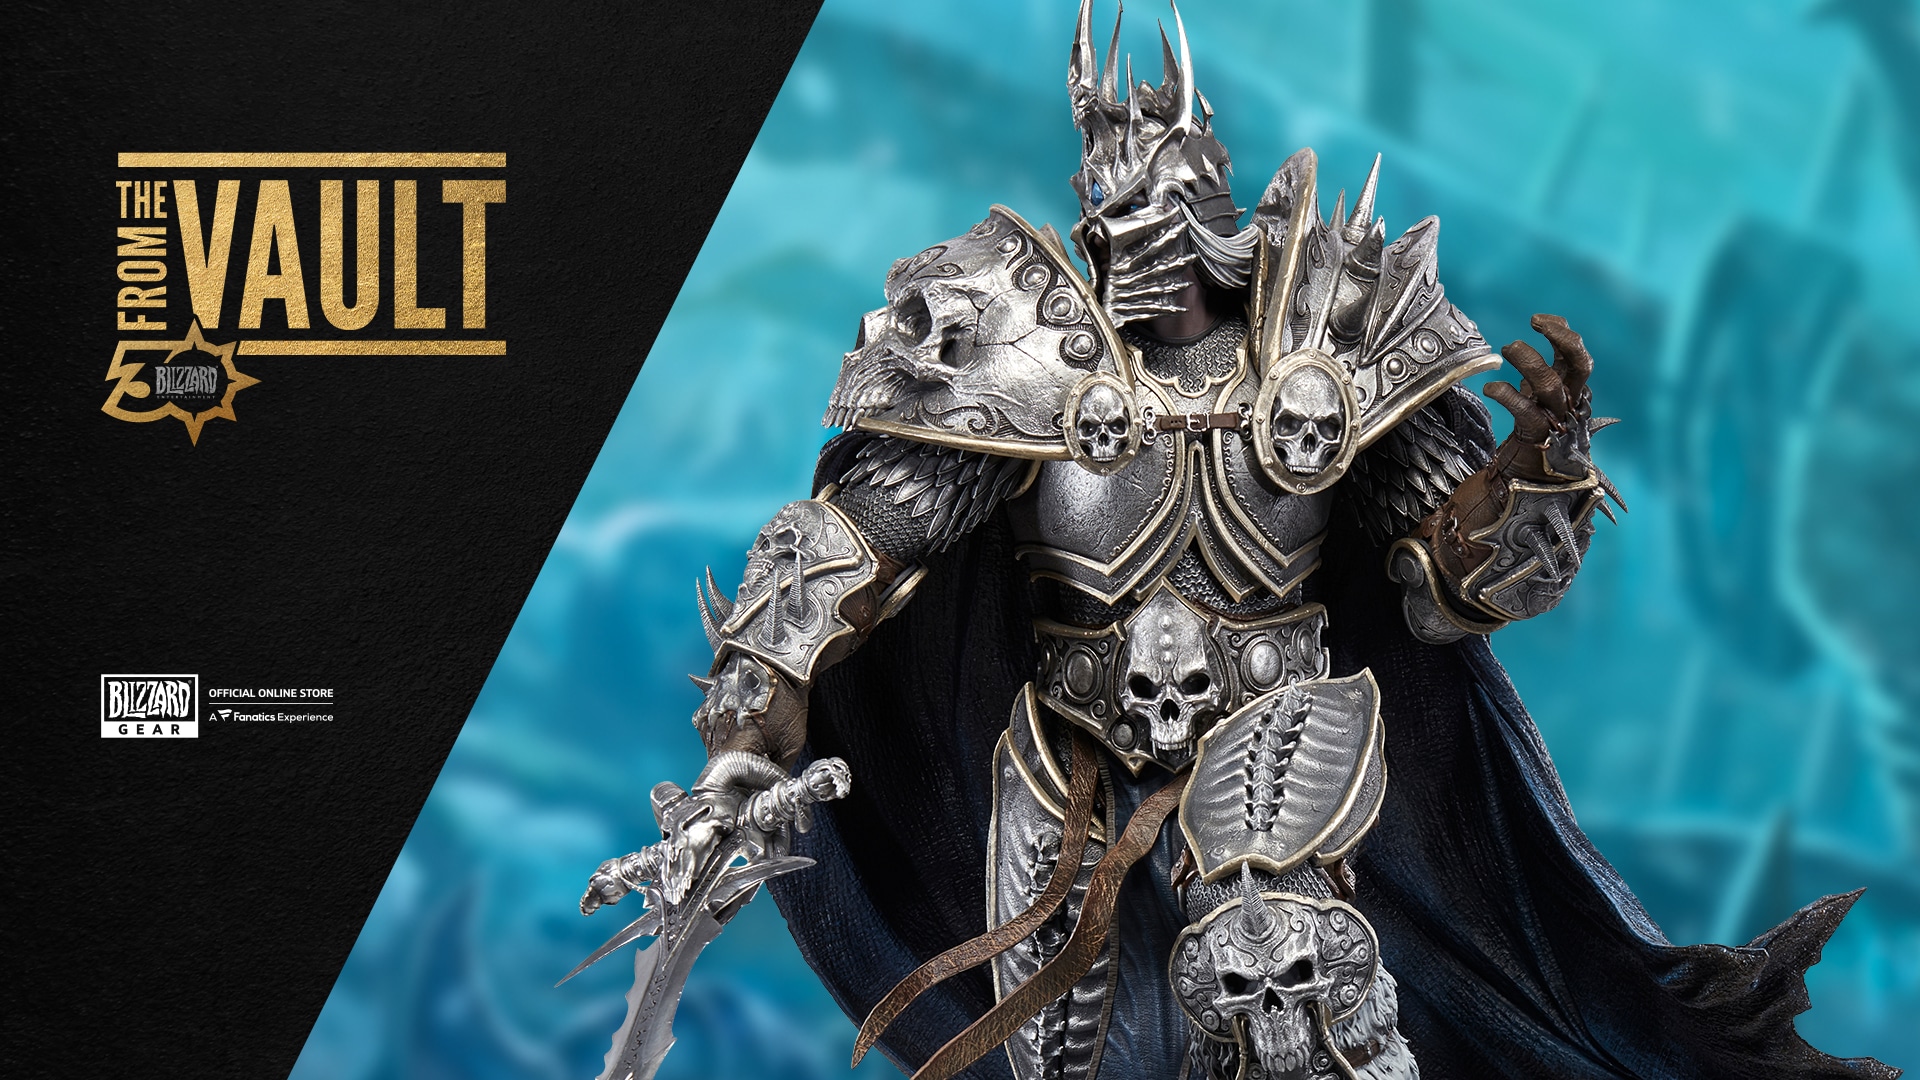 From the Vault: The Lich King Collection - now live on the Blizzard Gear Store!